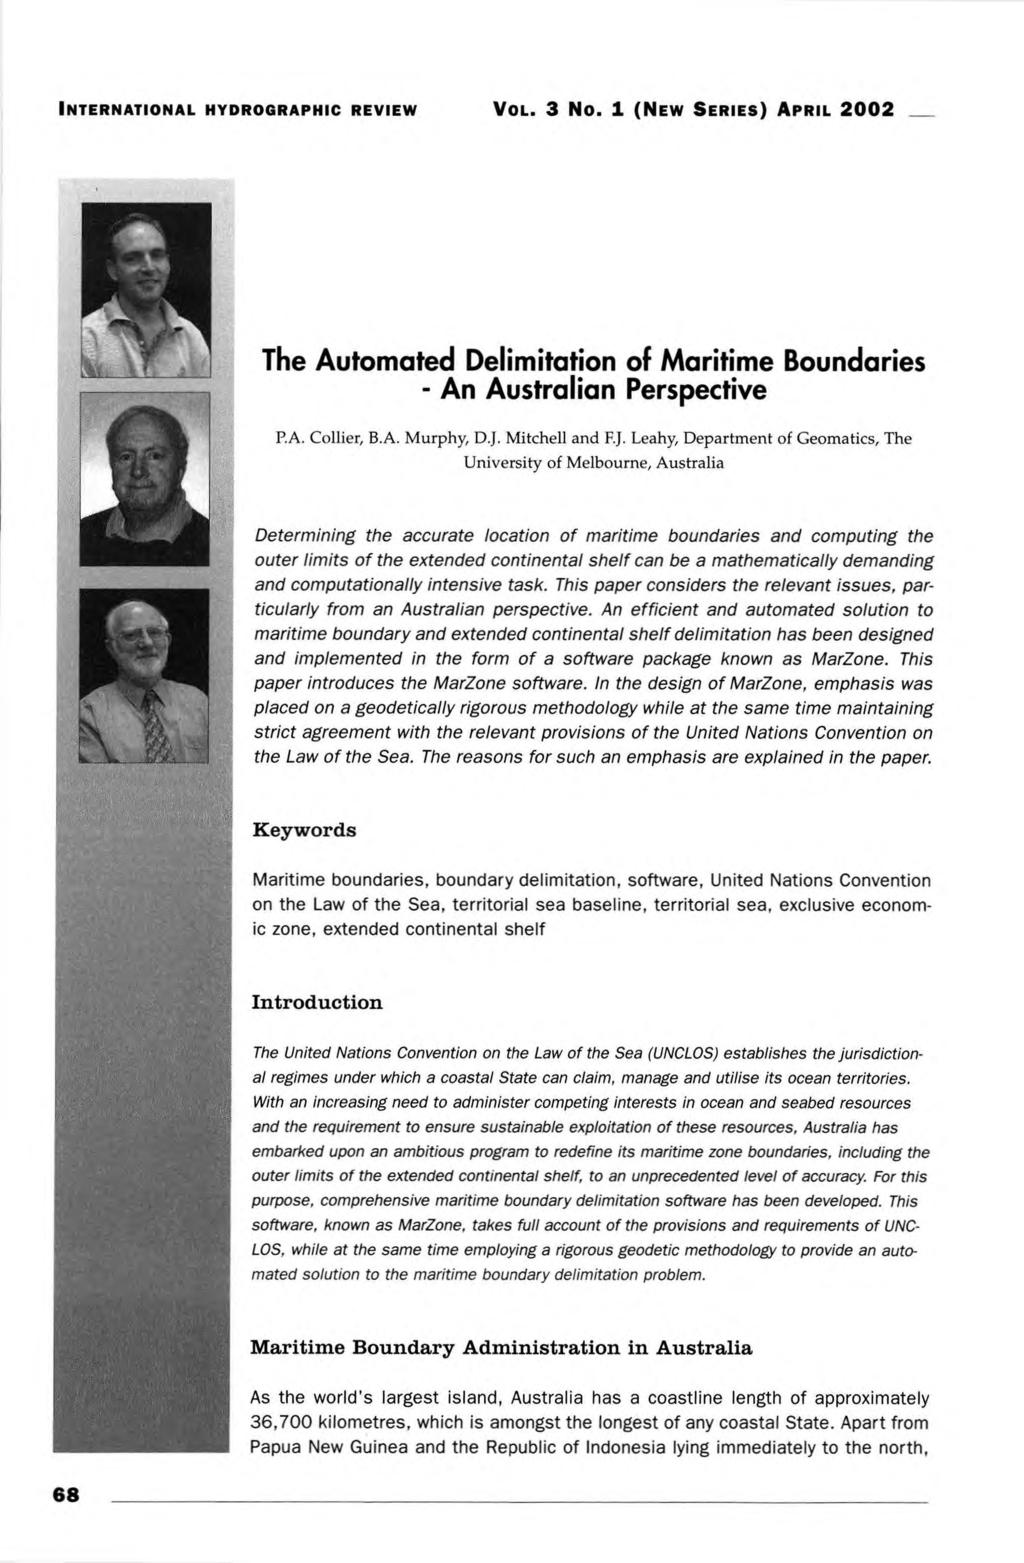 The Automated Delimitation of Maritime Boundaries - An Australian Perspective P.A. Collier, B.A. Murphy, D.J.